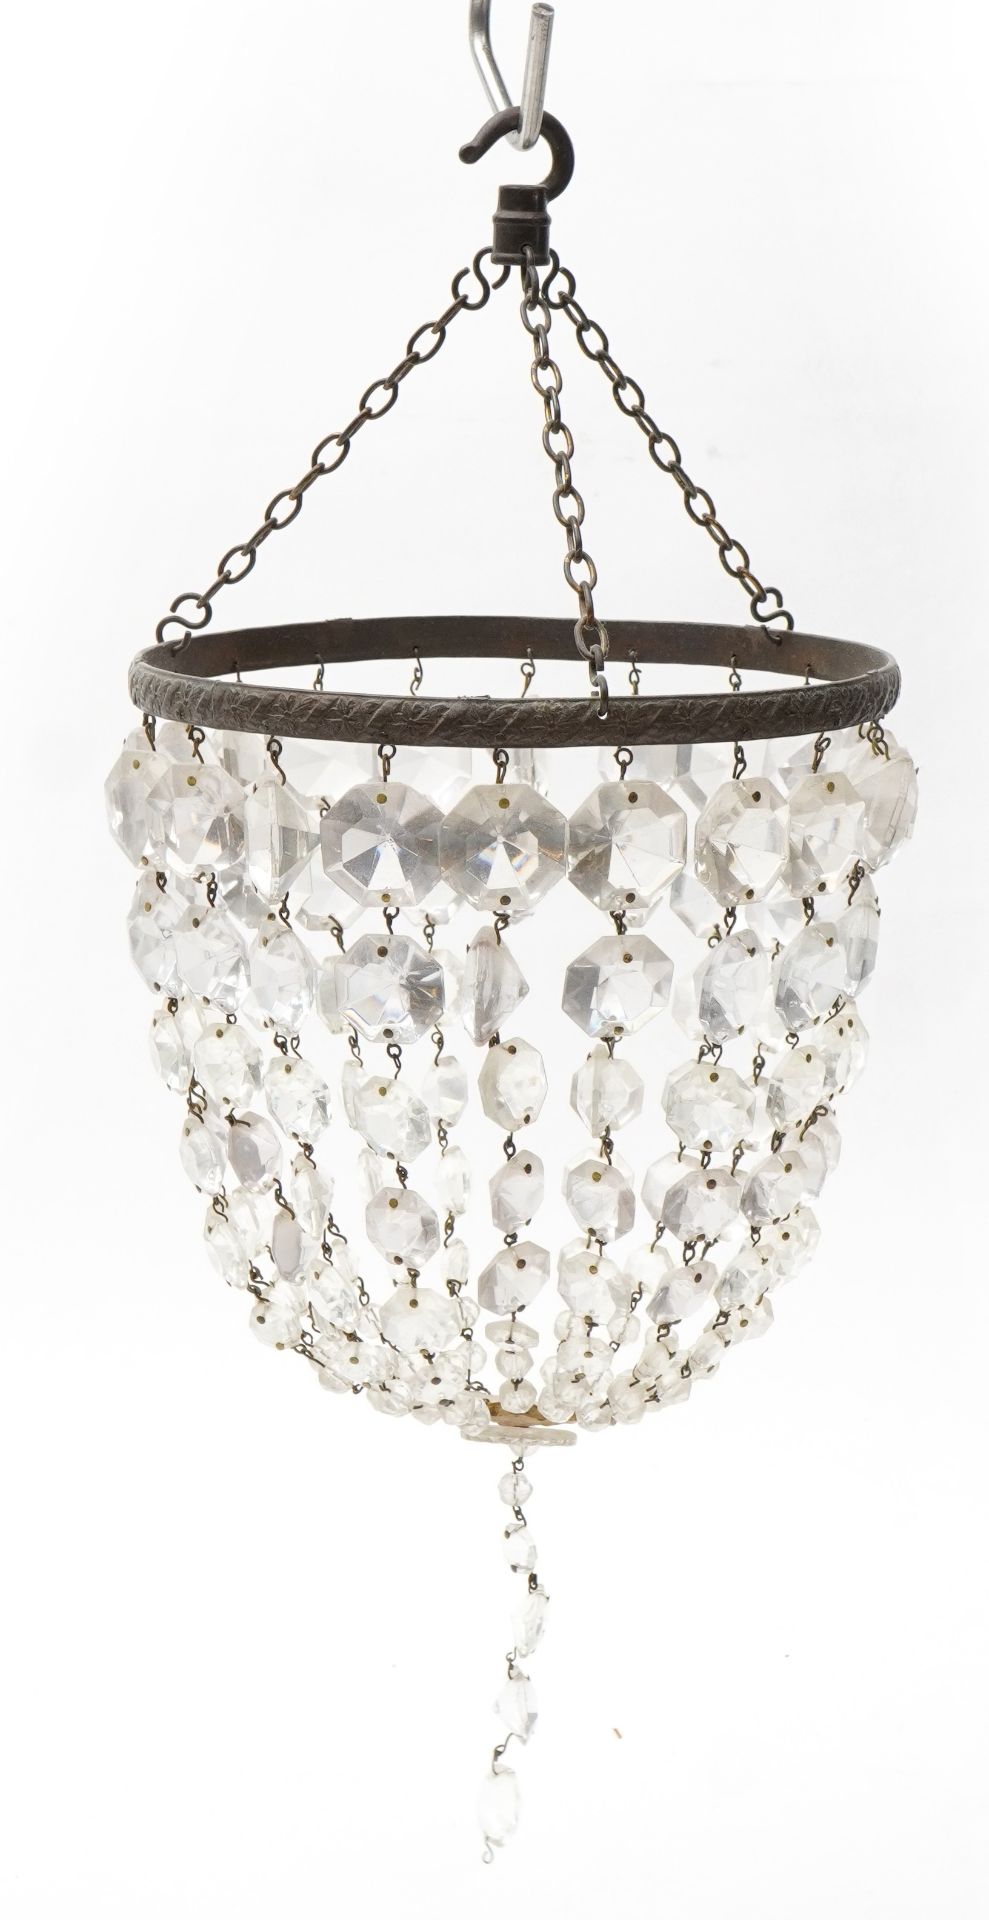 Two brass bag chandeliers with cut glass drops, the largest 26cm in diameter : For further - Image 4 of 6